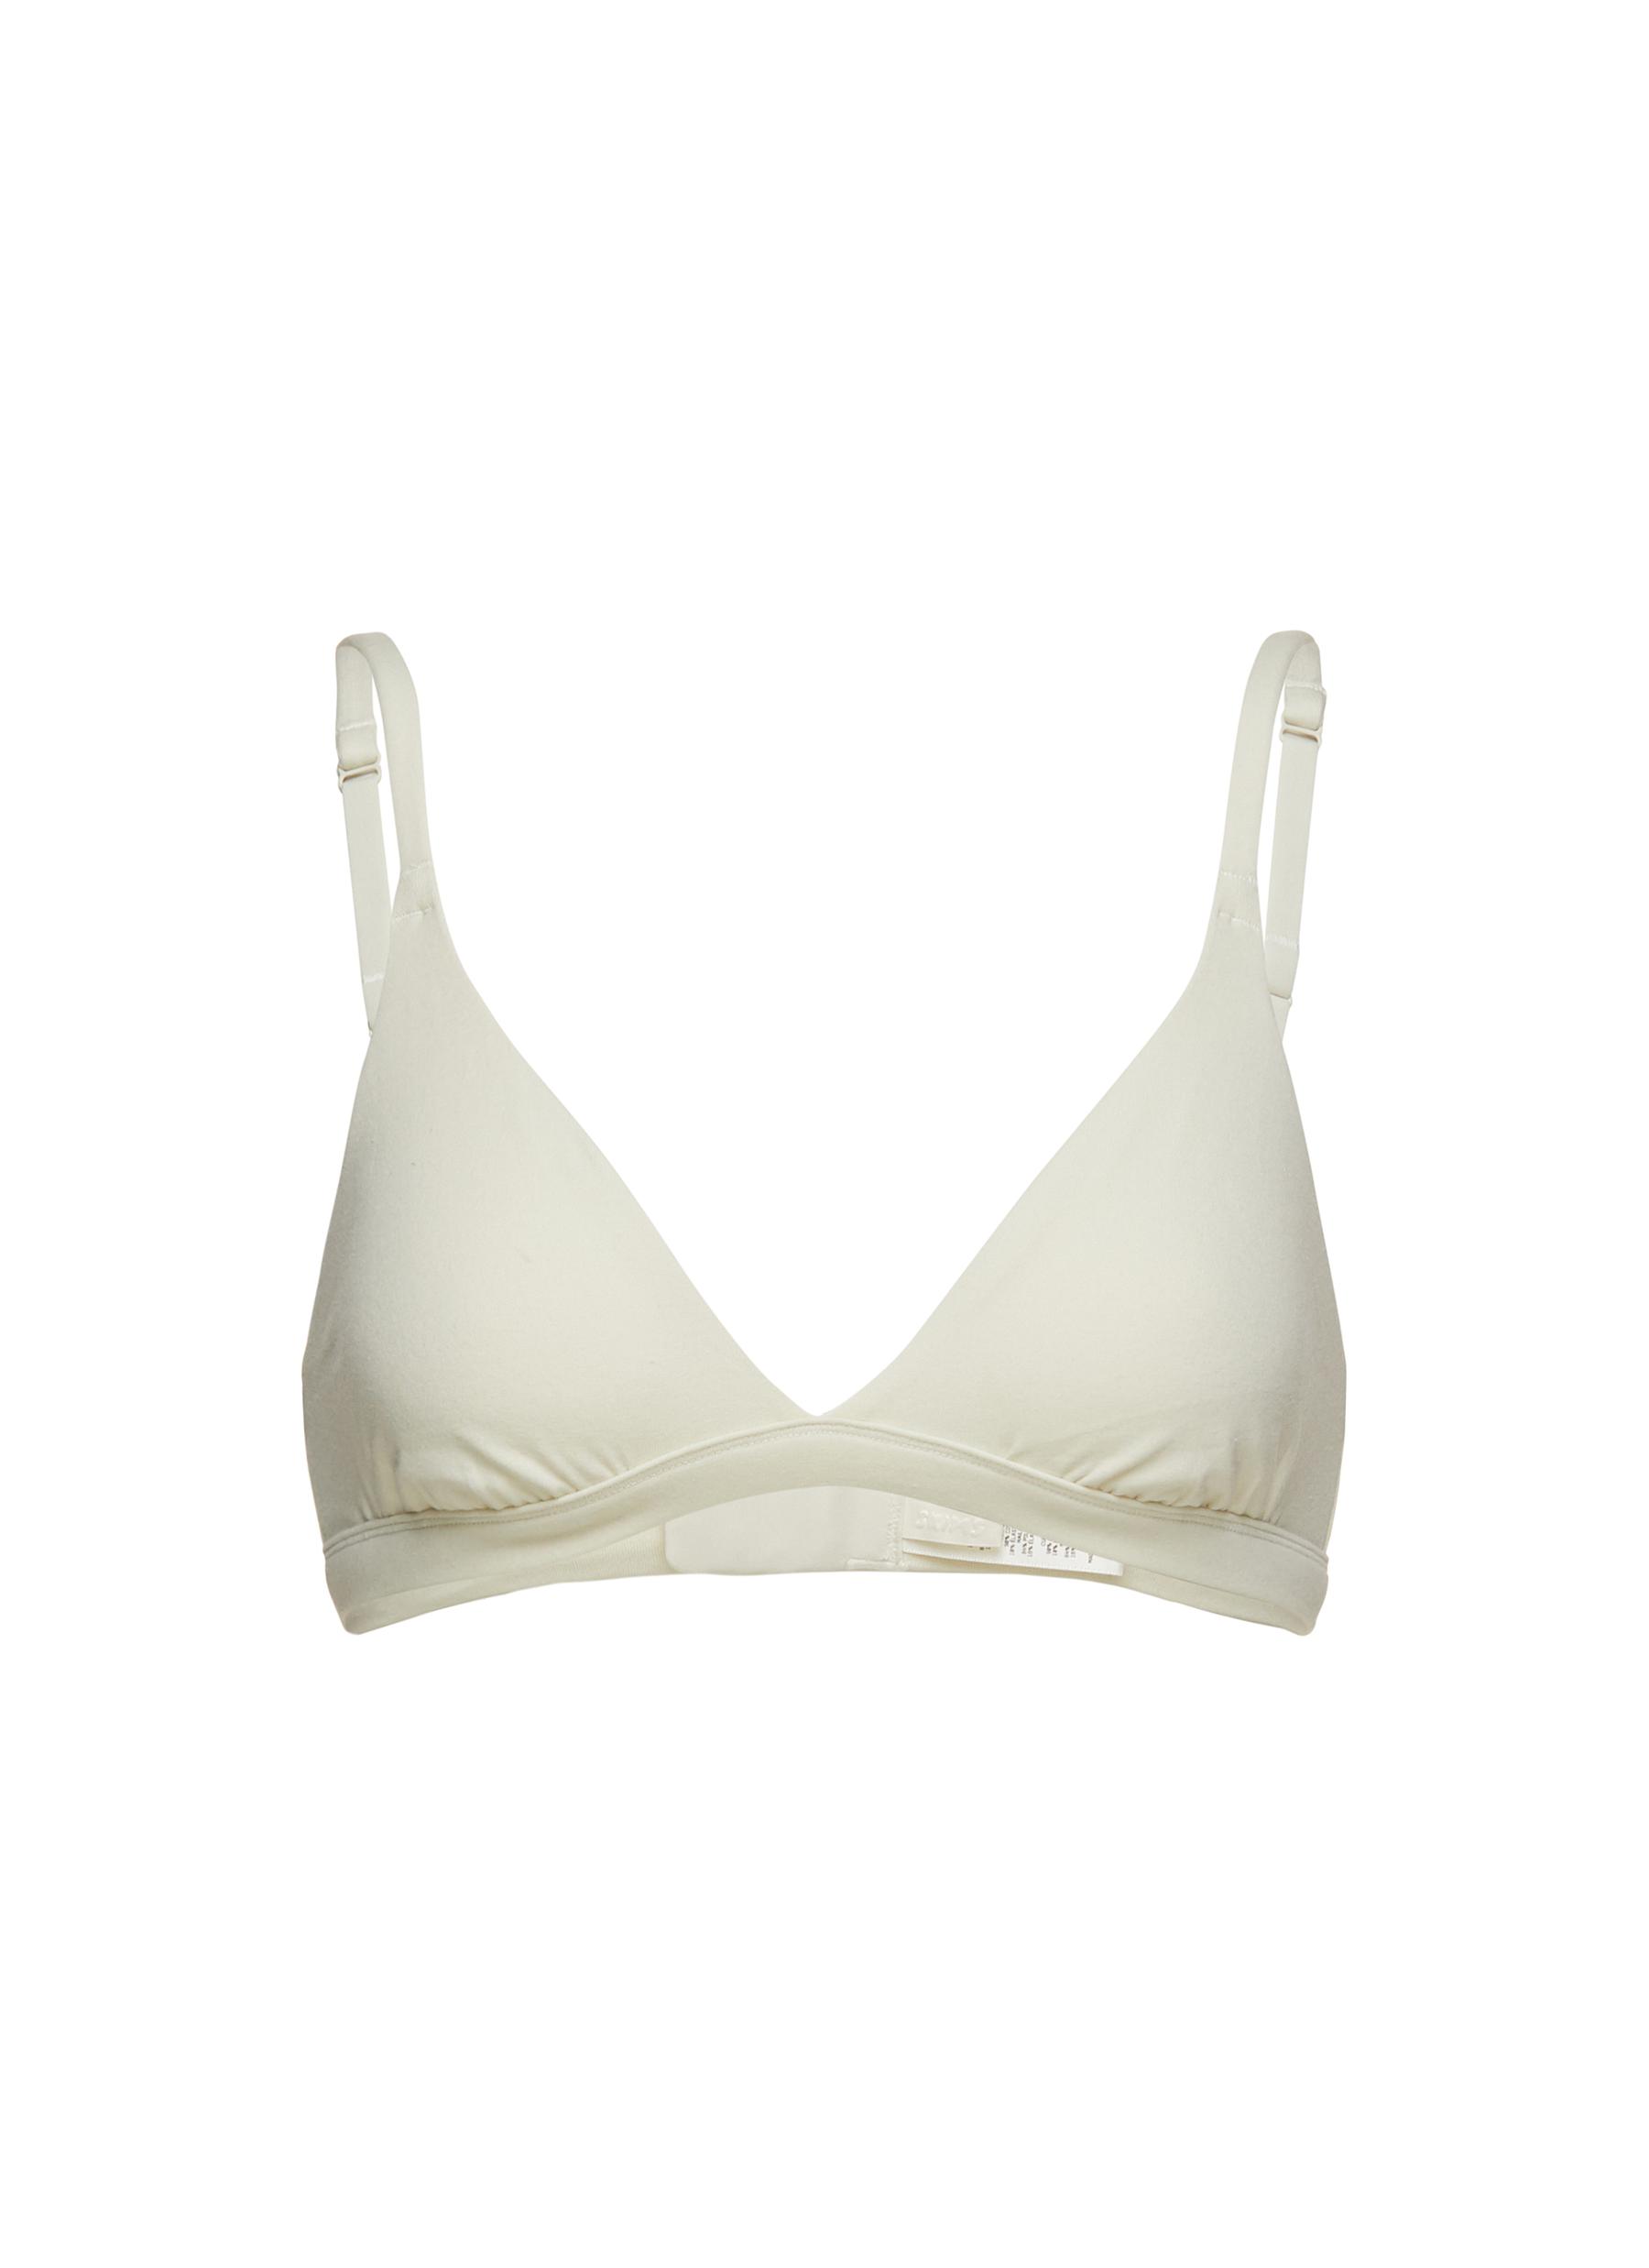 Skims Cotton Jersey Triangle Bralette In Stock Availability and Price